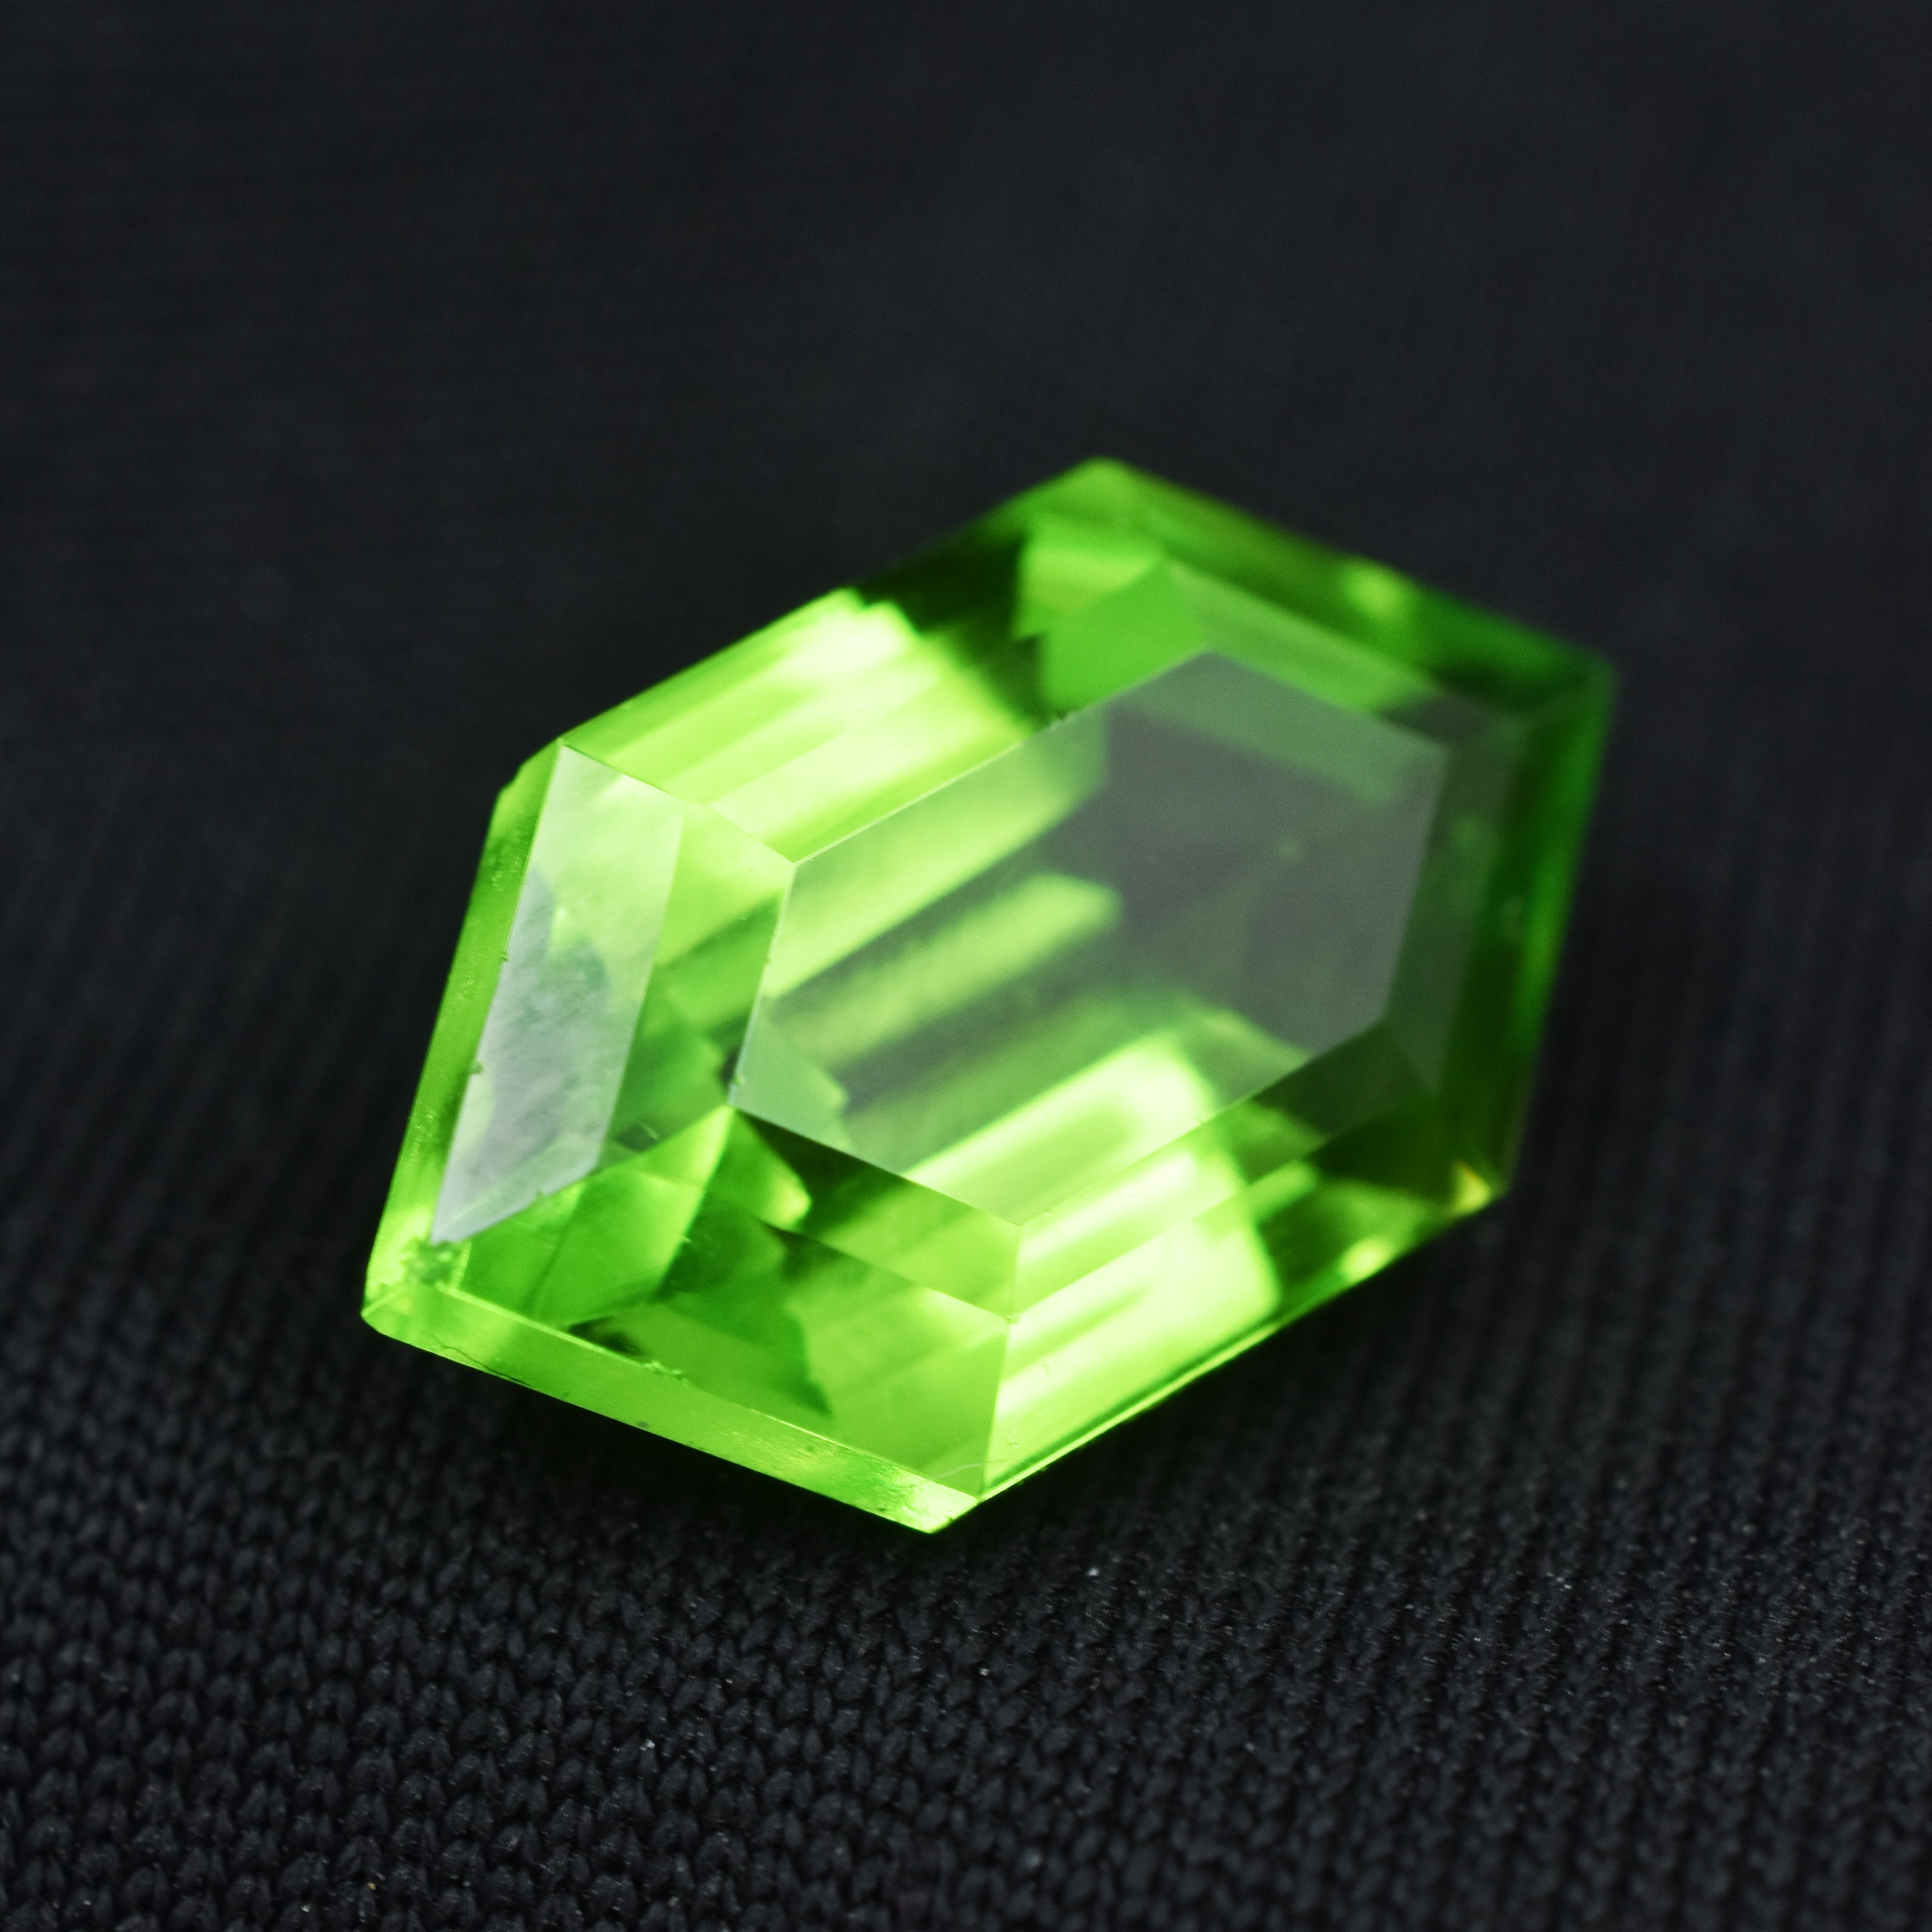 Pendant Making Gem Specially For Engagement Gift 11.12 Carat Green Peridot Fancy Shape Loose Gemstone | High Sale | Precious Peridot | Free Shipping With Gift